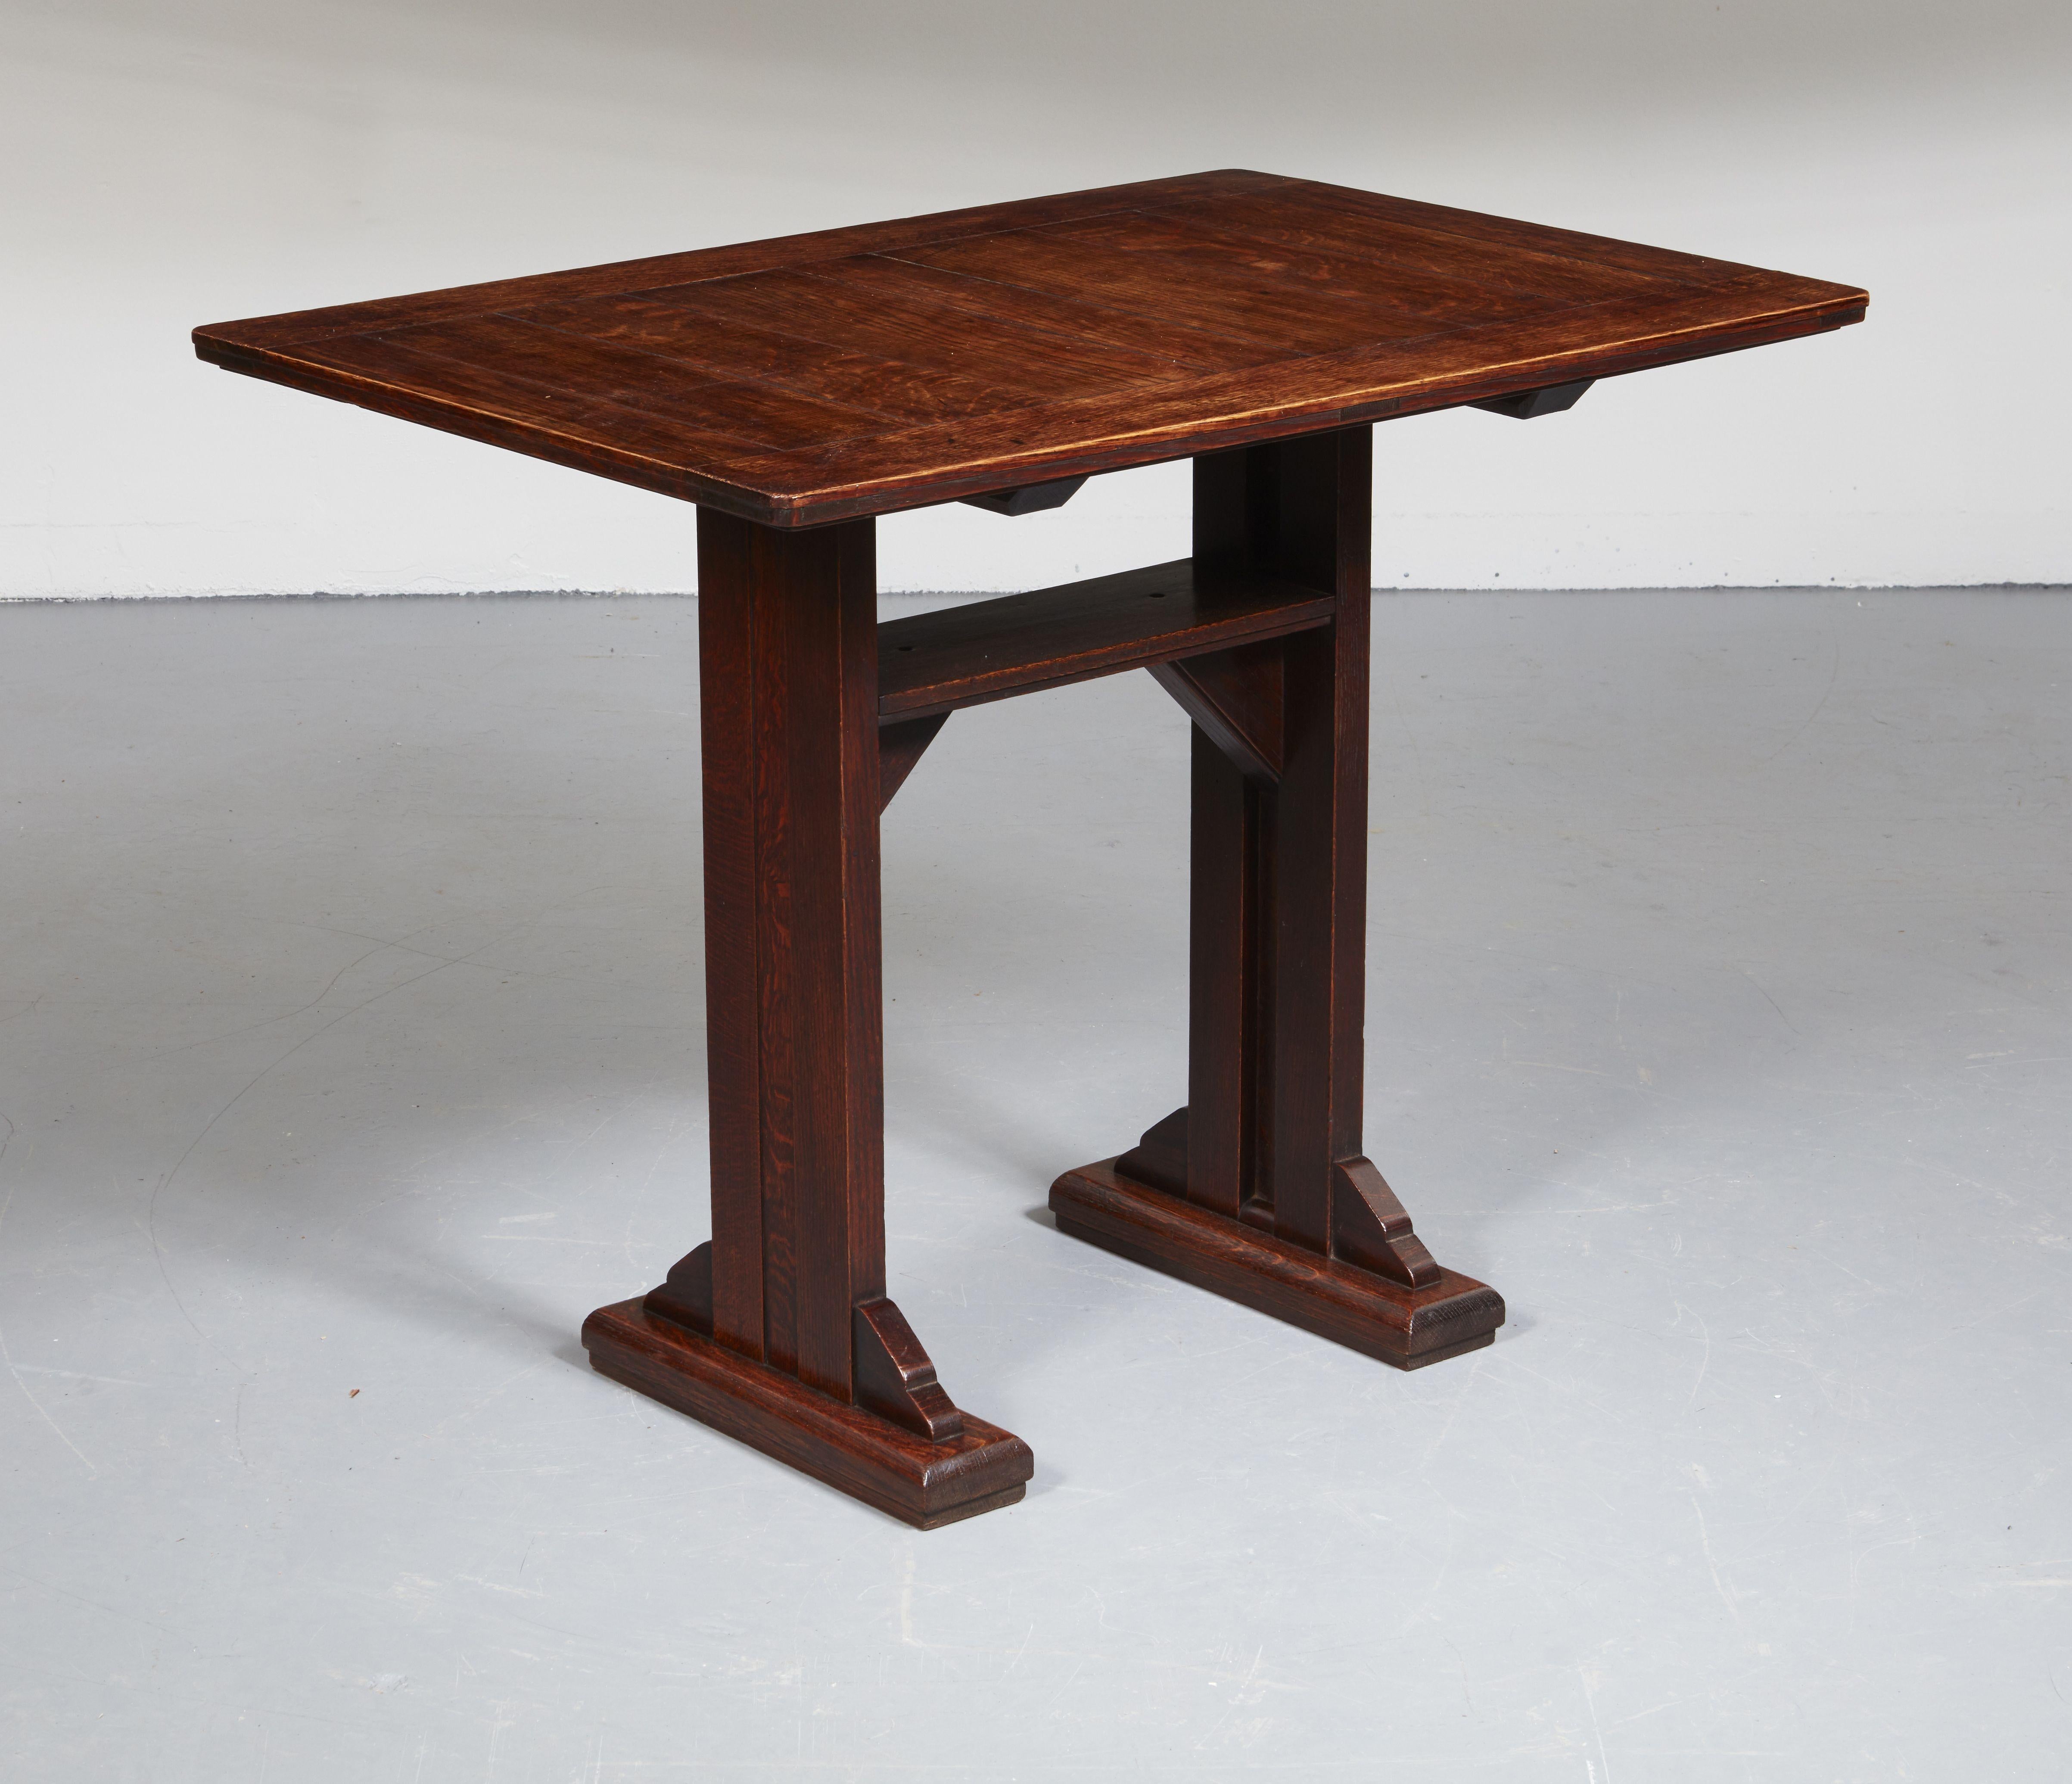 An English Arts & Crafts center table in oak with rectangular top of substantial panel construction over boarded straight legs with central reveal on shoe feet with solid shaped diagonal braces and high-level stretcher with triangular braces. Solid